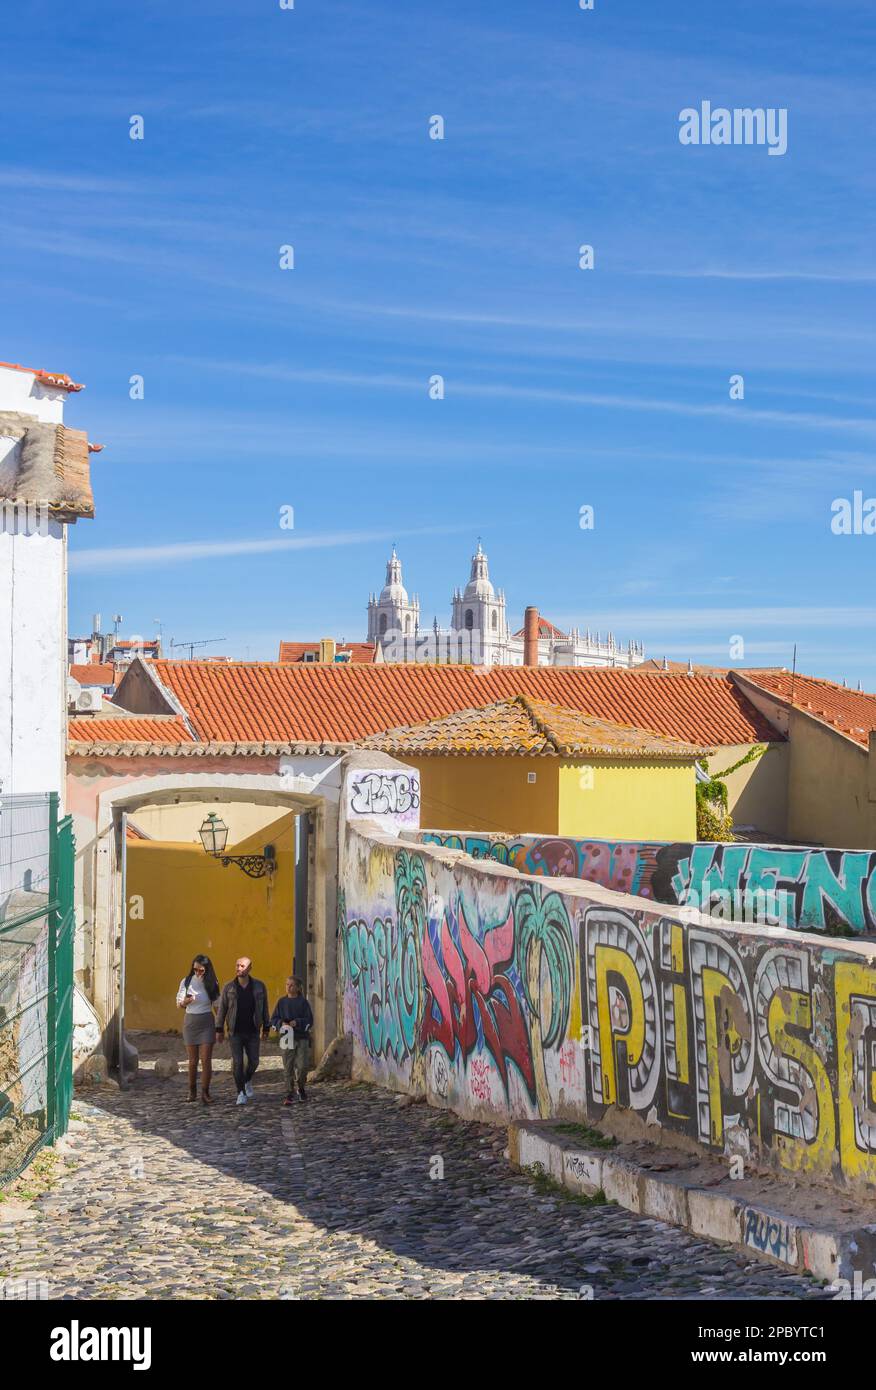 Old wall with graffiti at a cobblestoned street in Lisbon, Portugal Stock Photo